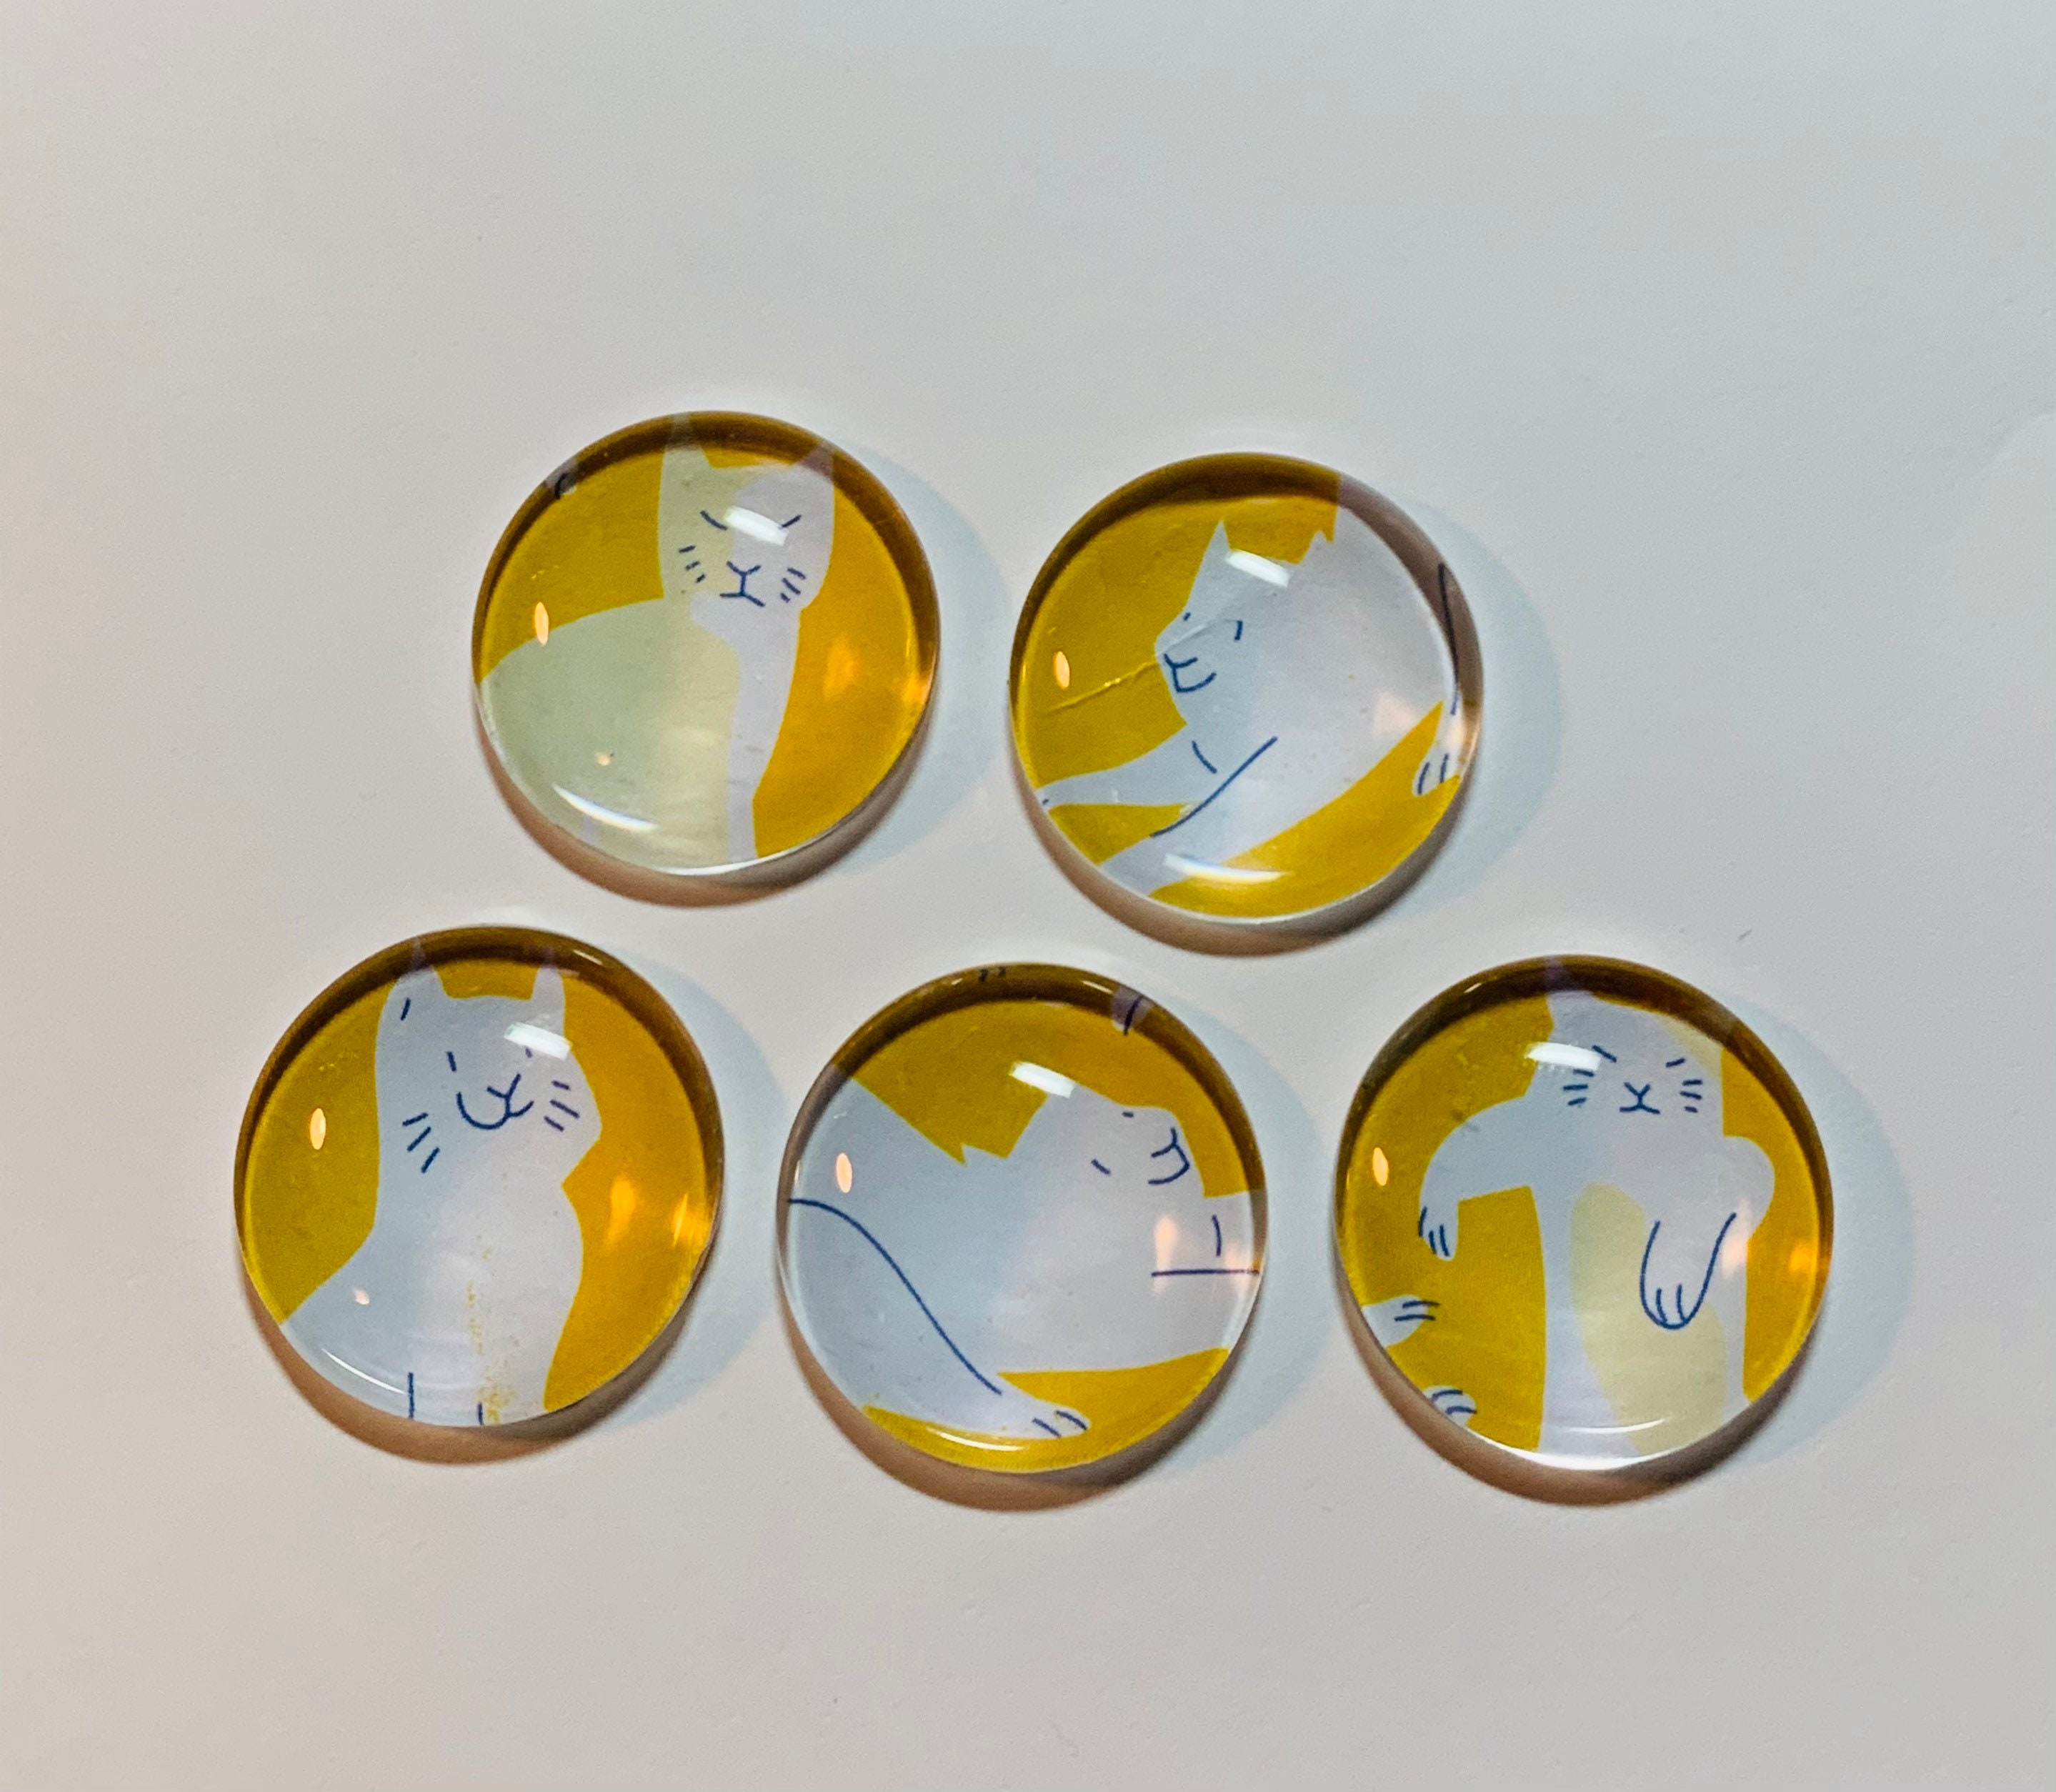 6) Glass Cat Magnets - GO HOME Unusual Decor and Gifts